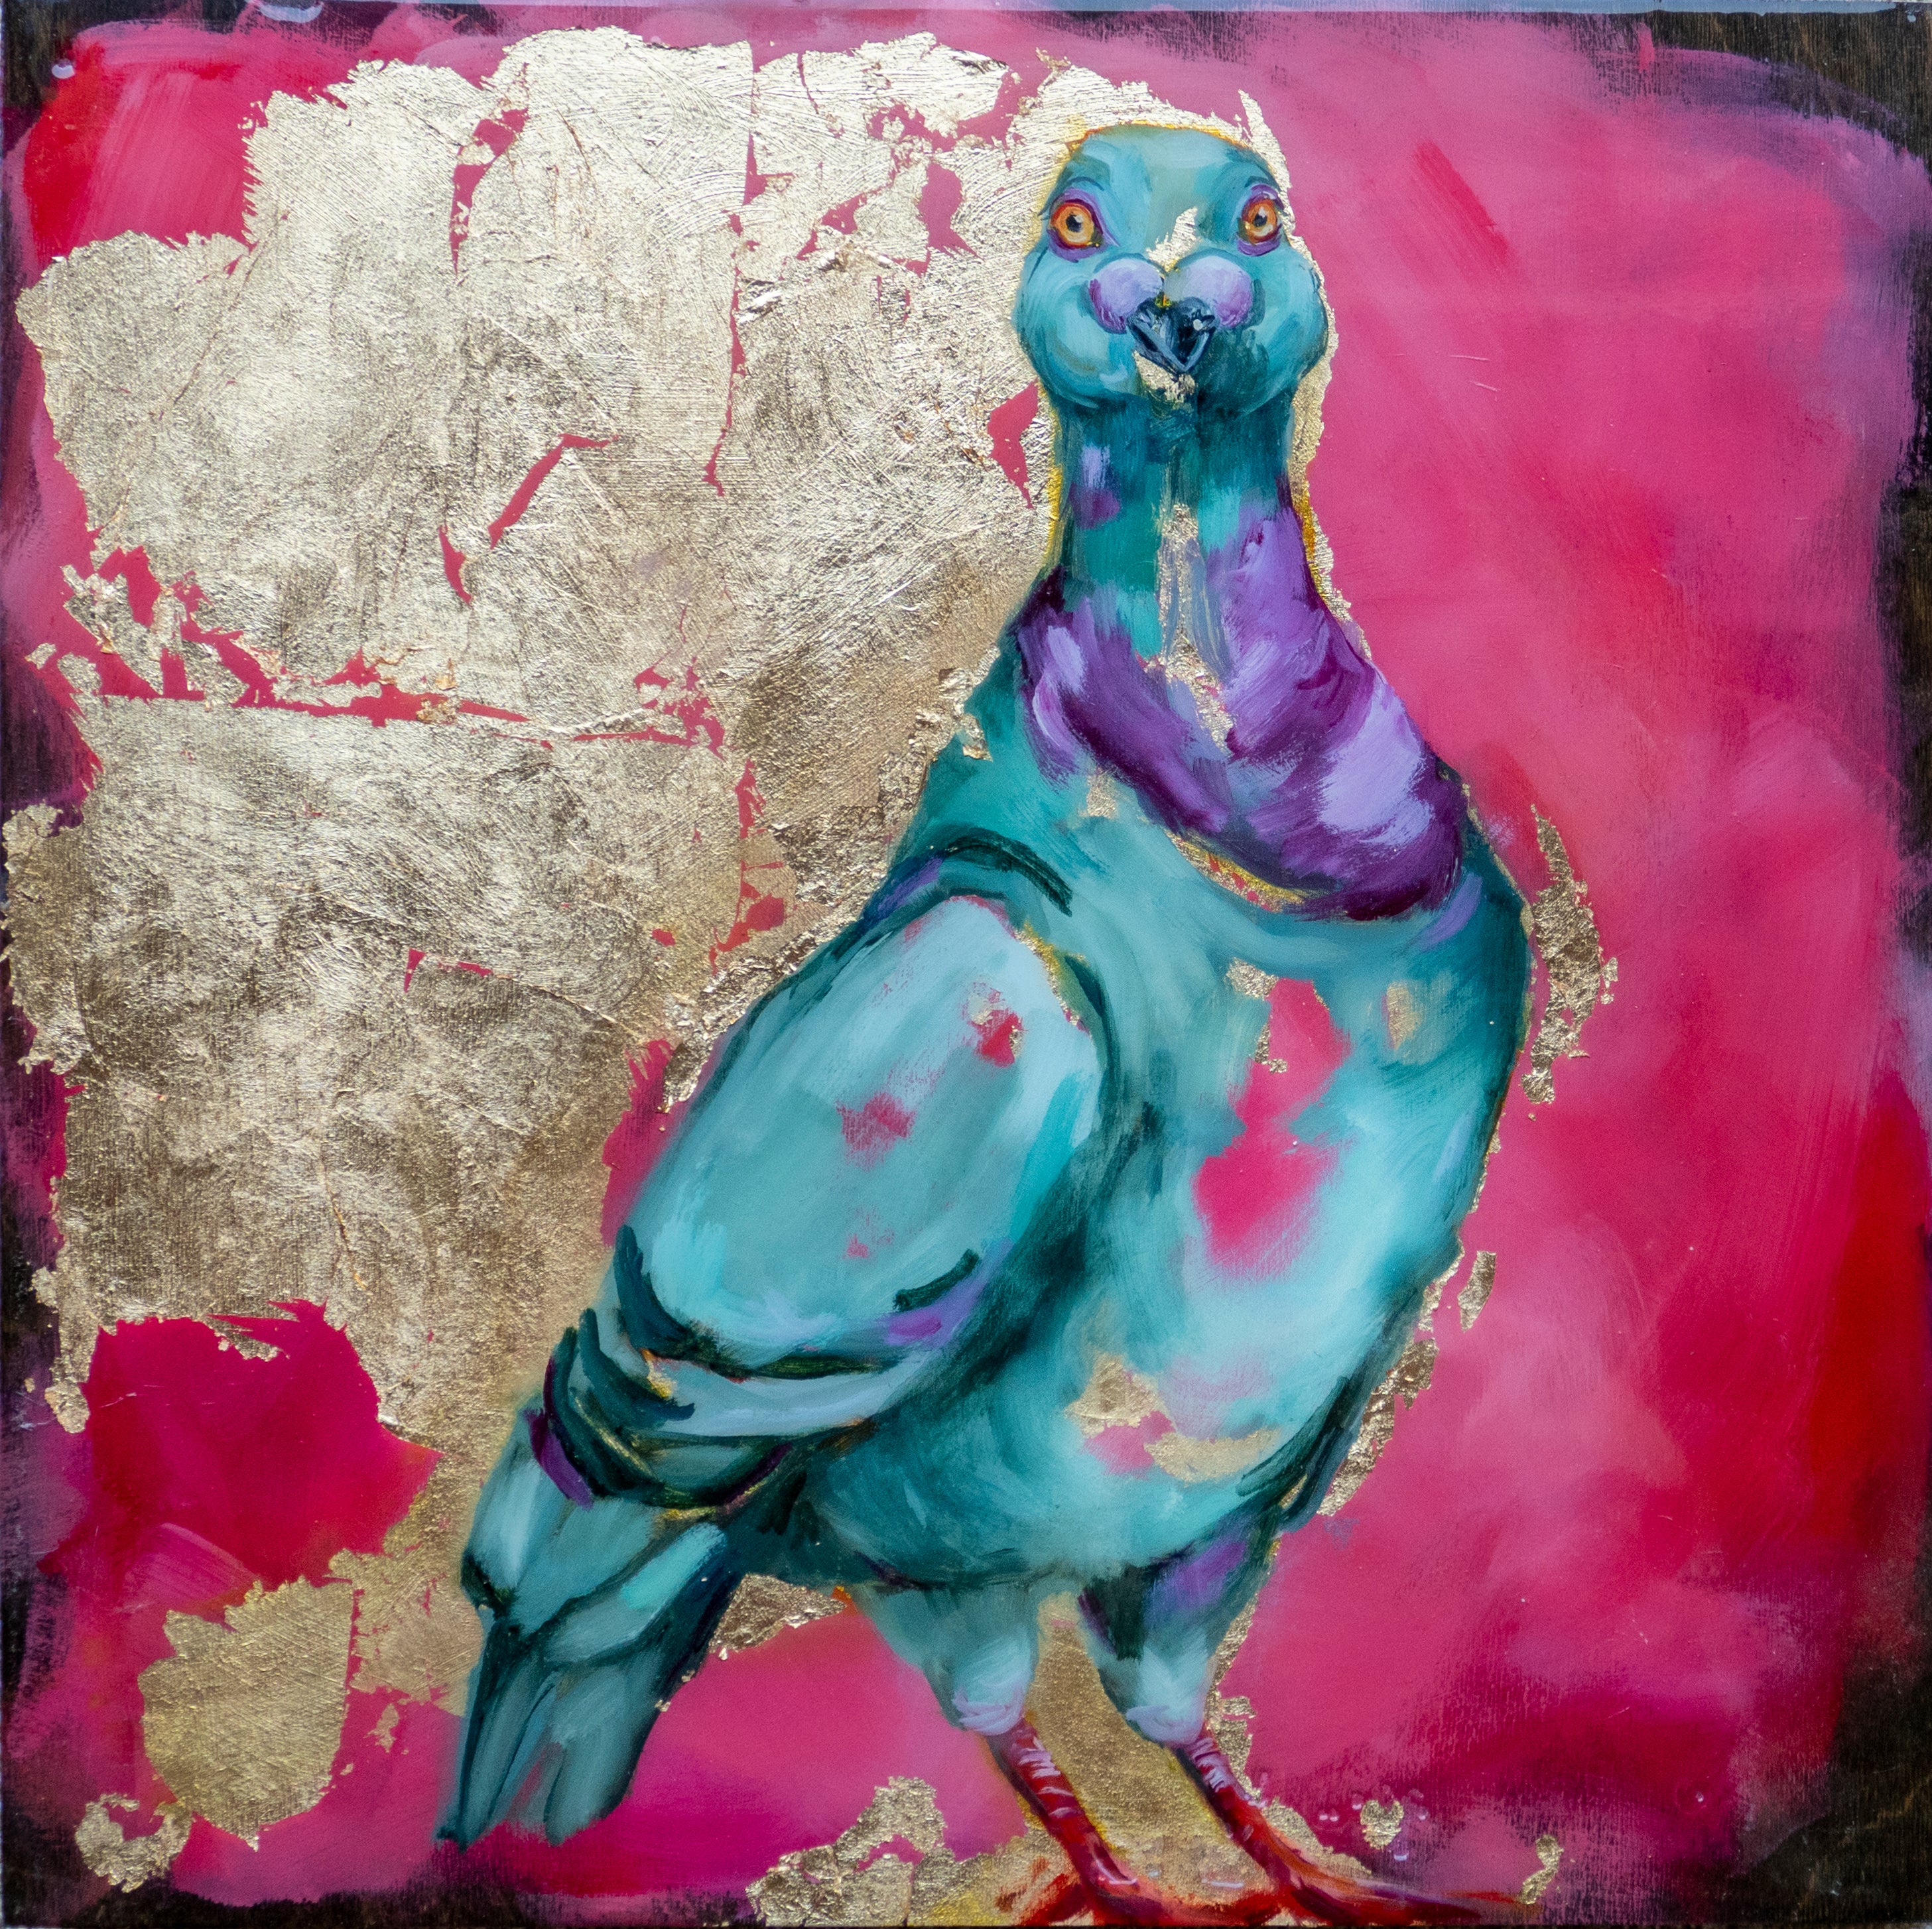 14"x14" painting of Pidgeon using mixed media; acrylic and oil, pencil, and gold leaf with glossy resin finish on surface; artist Shaney Watters